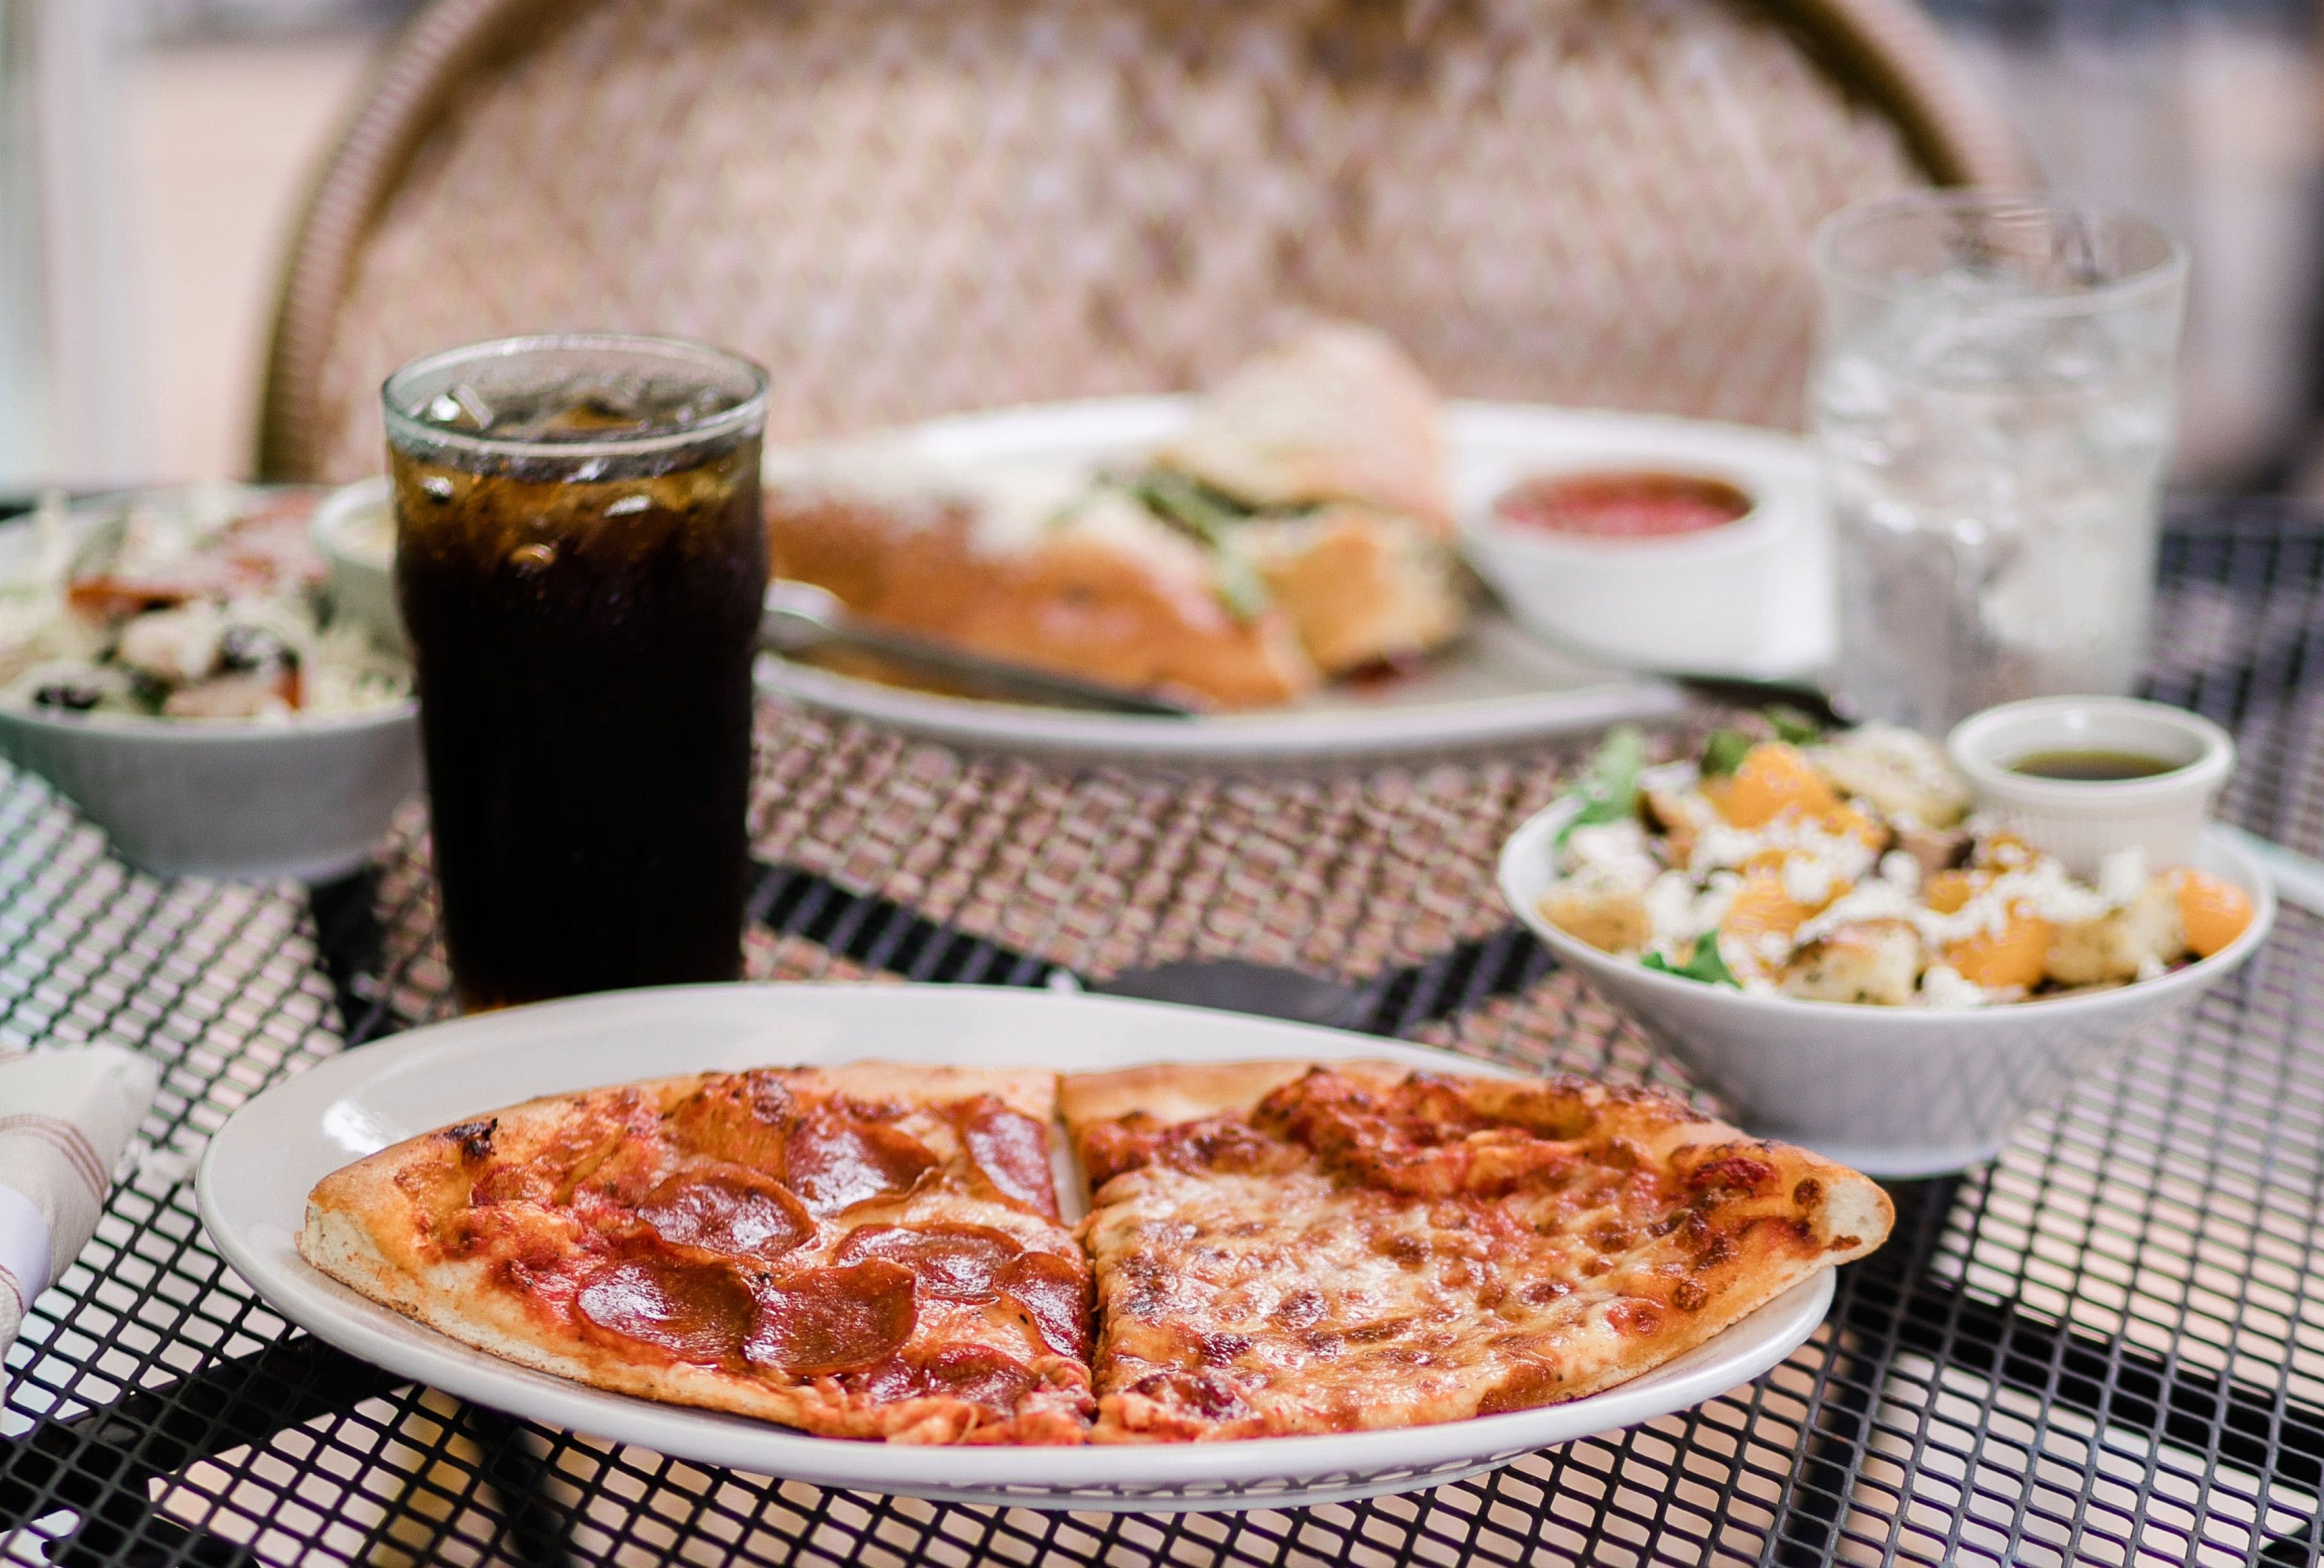 Photo of Outdoor table with pizza slices, salads, and drinks.